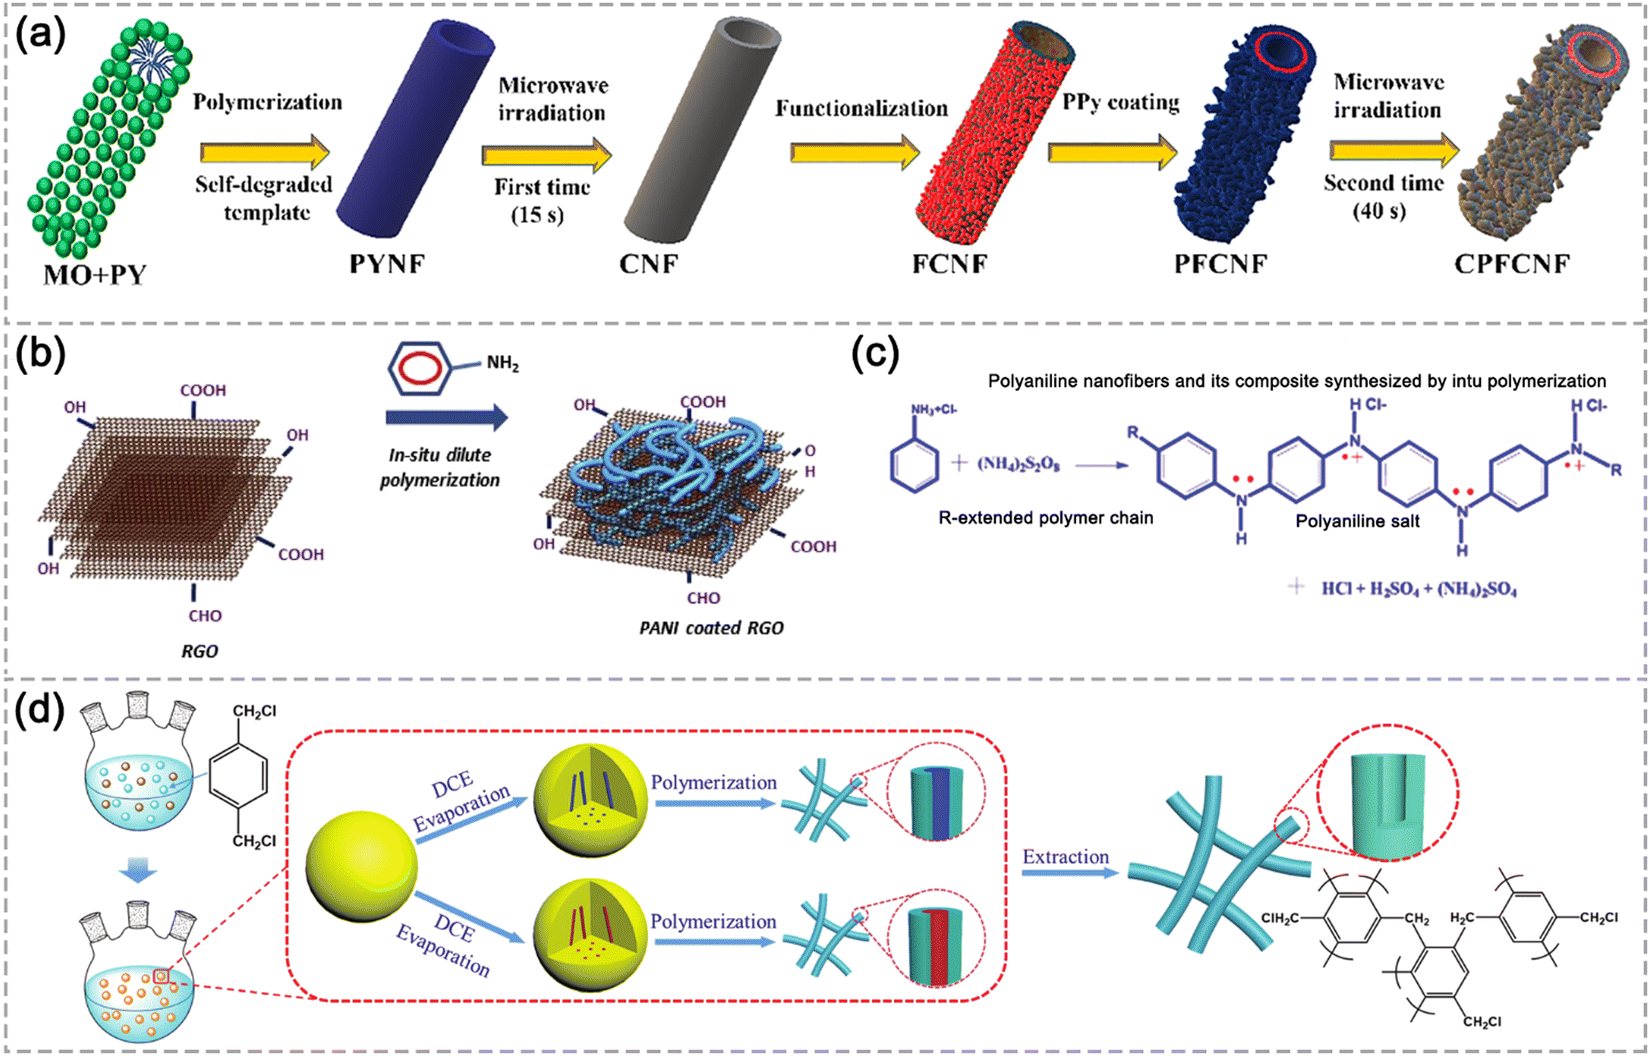 Tailoring carbon-based nanofiber microstructures for 